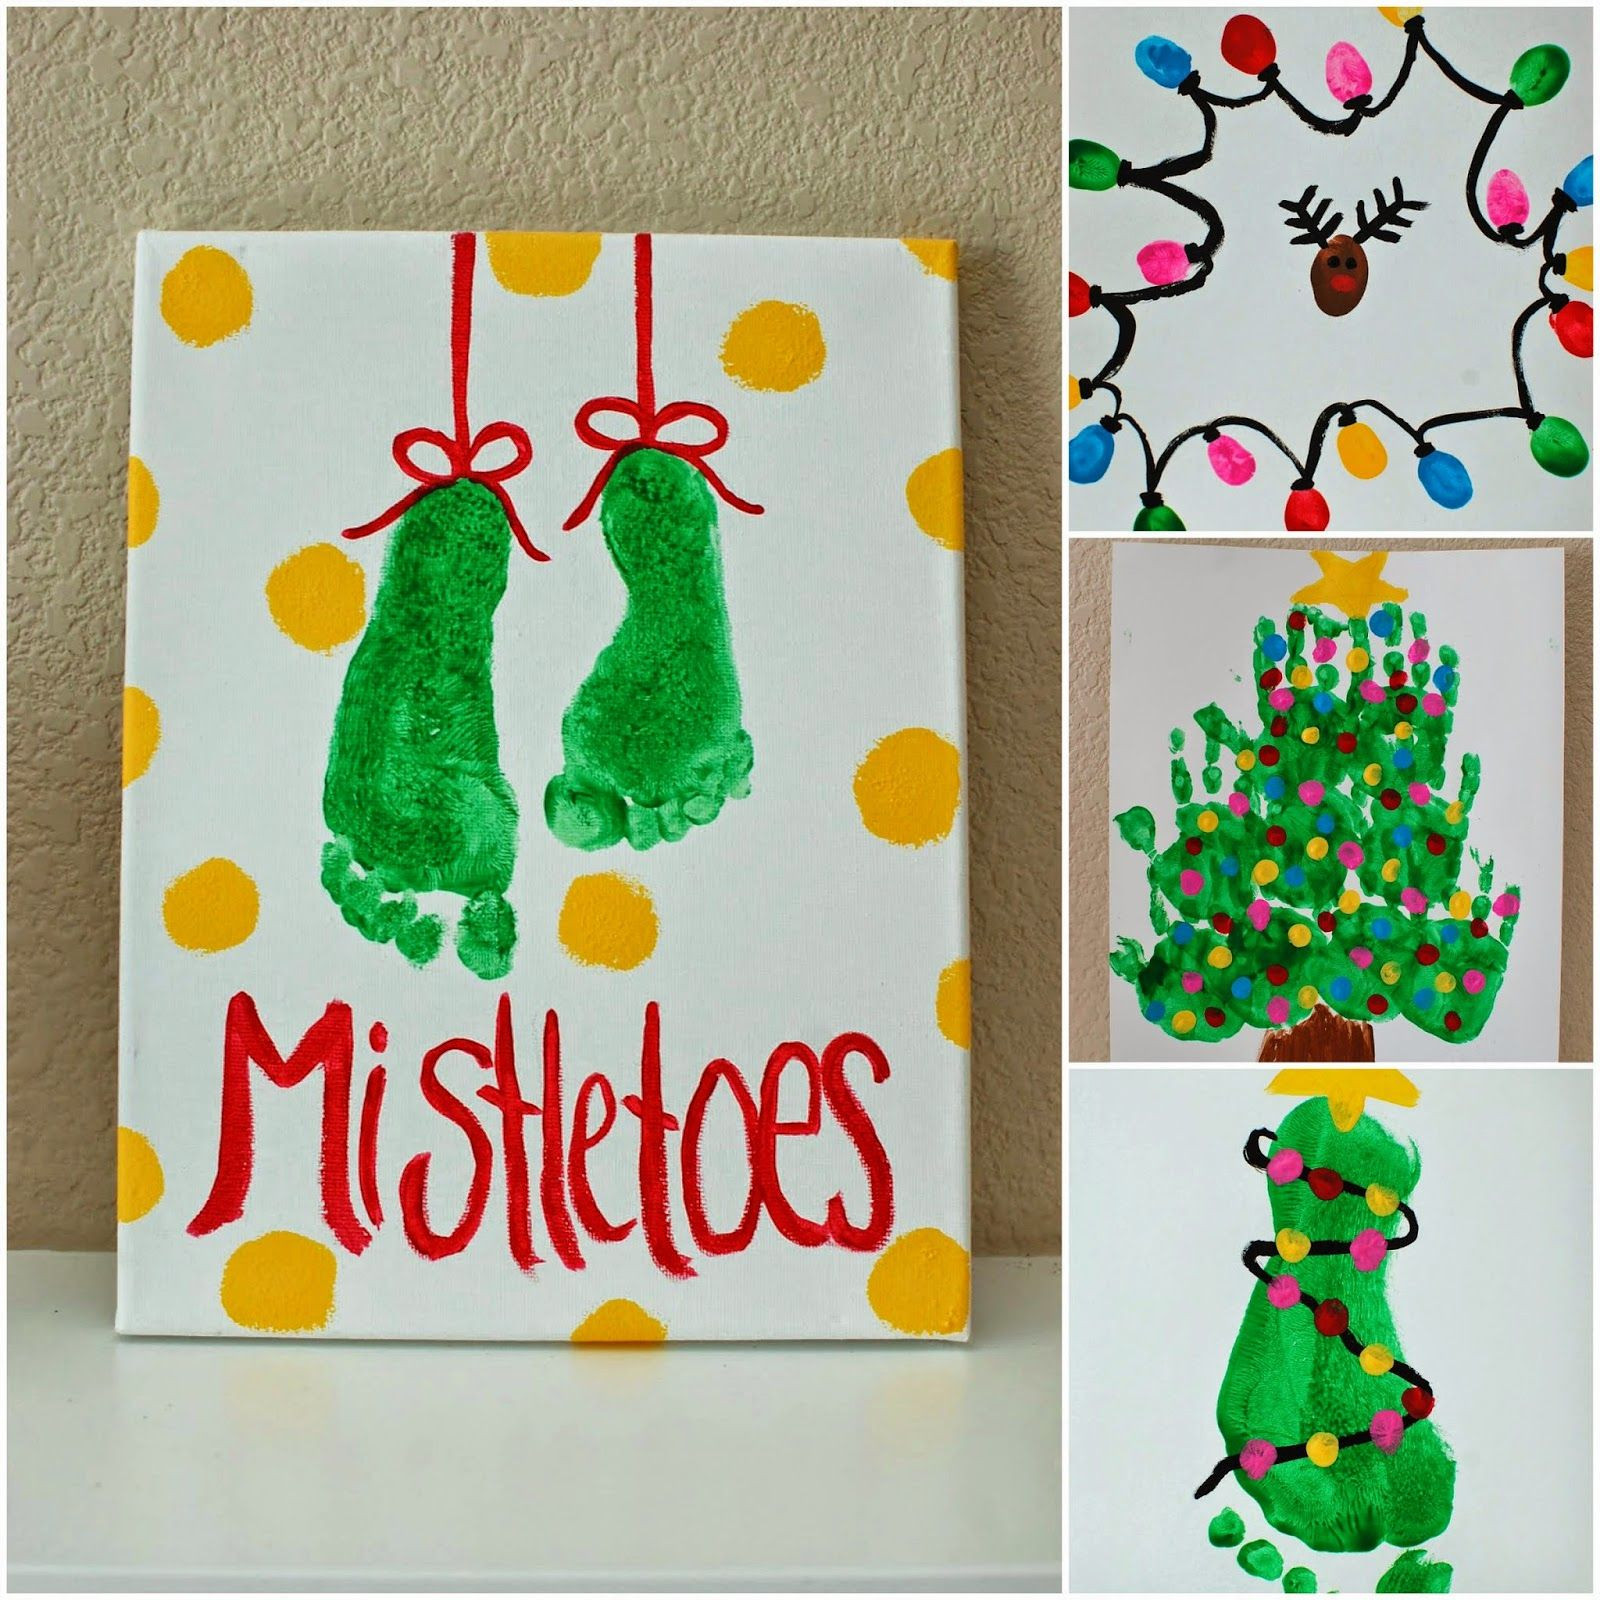 Easy Crafts And Free Printables For Xmas Cards For Kids To Make
 15 Awesome Christmas Cards to Make With Kids